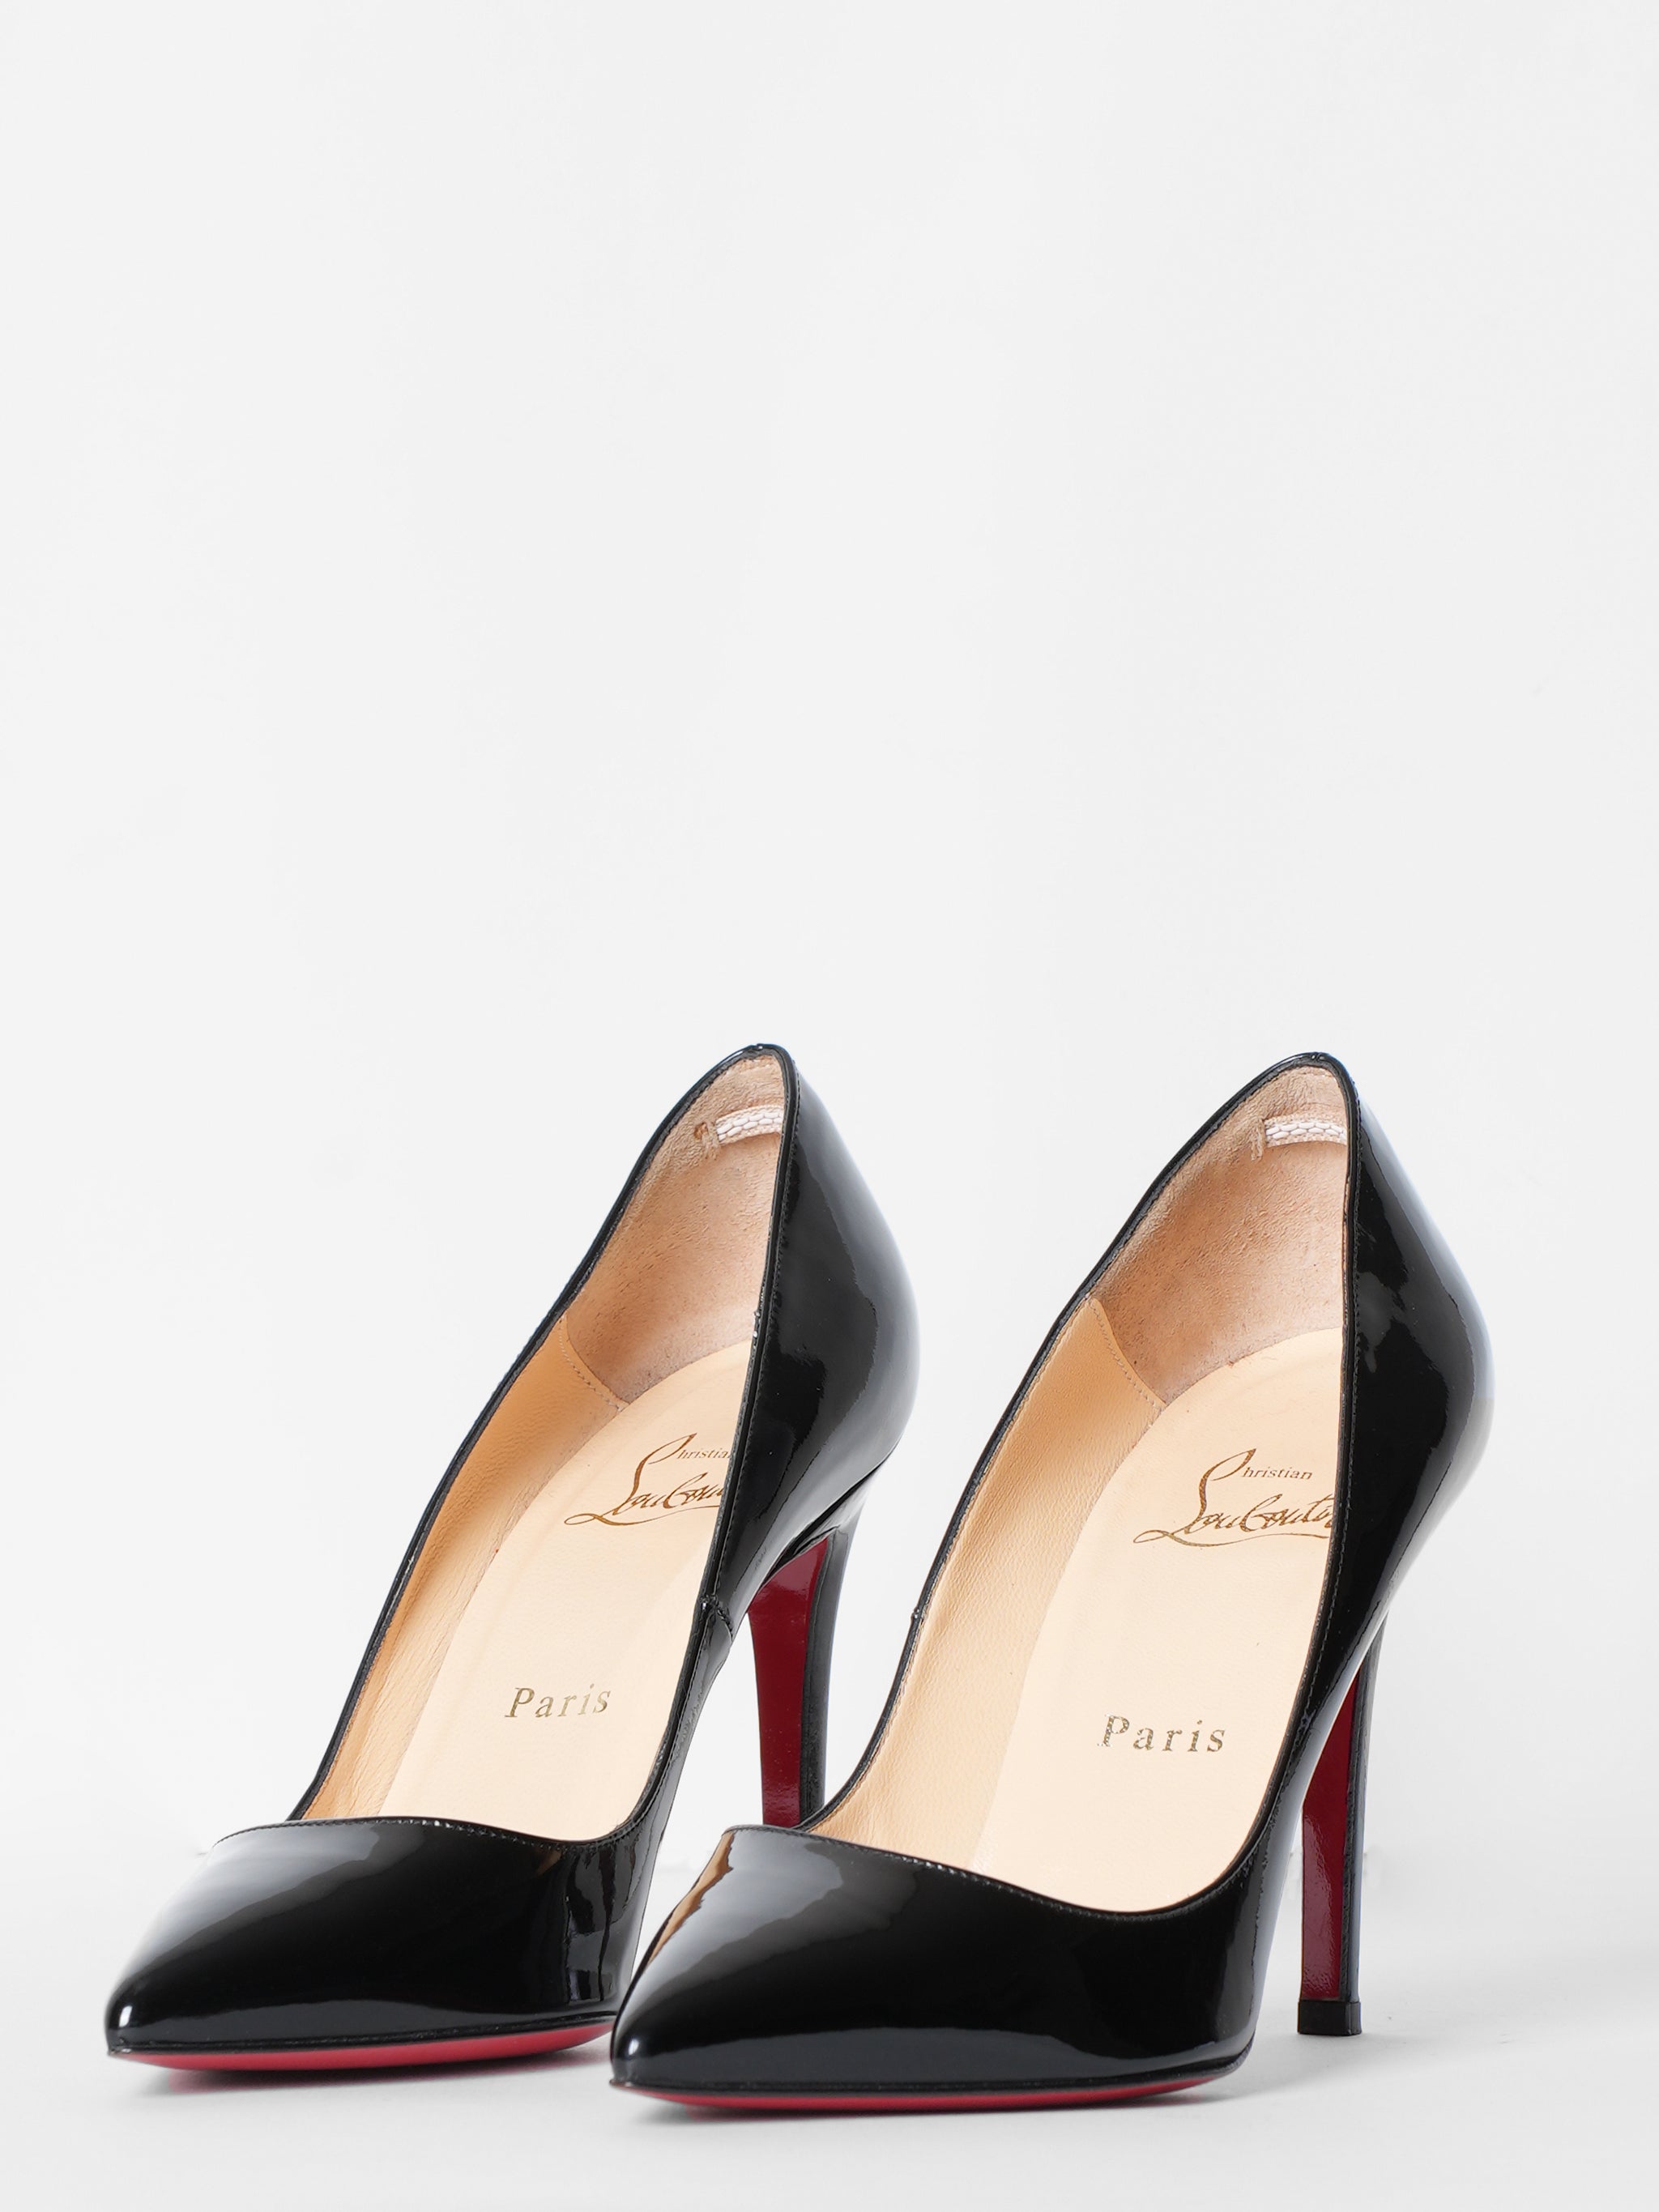 Christian Louboutin Pigalle Patent Heels